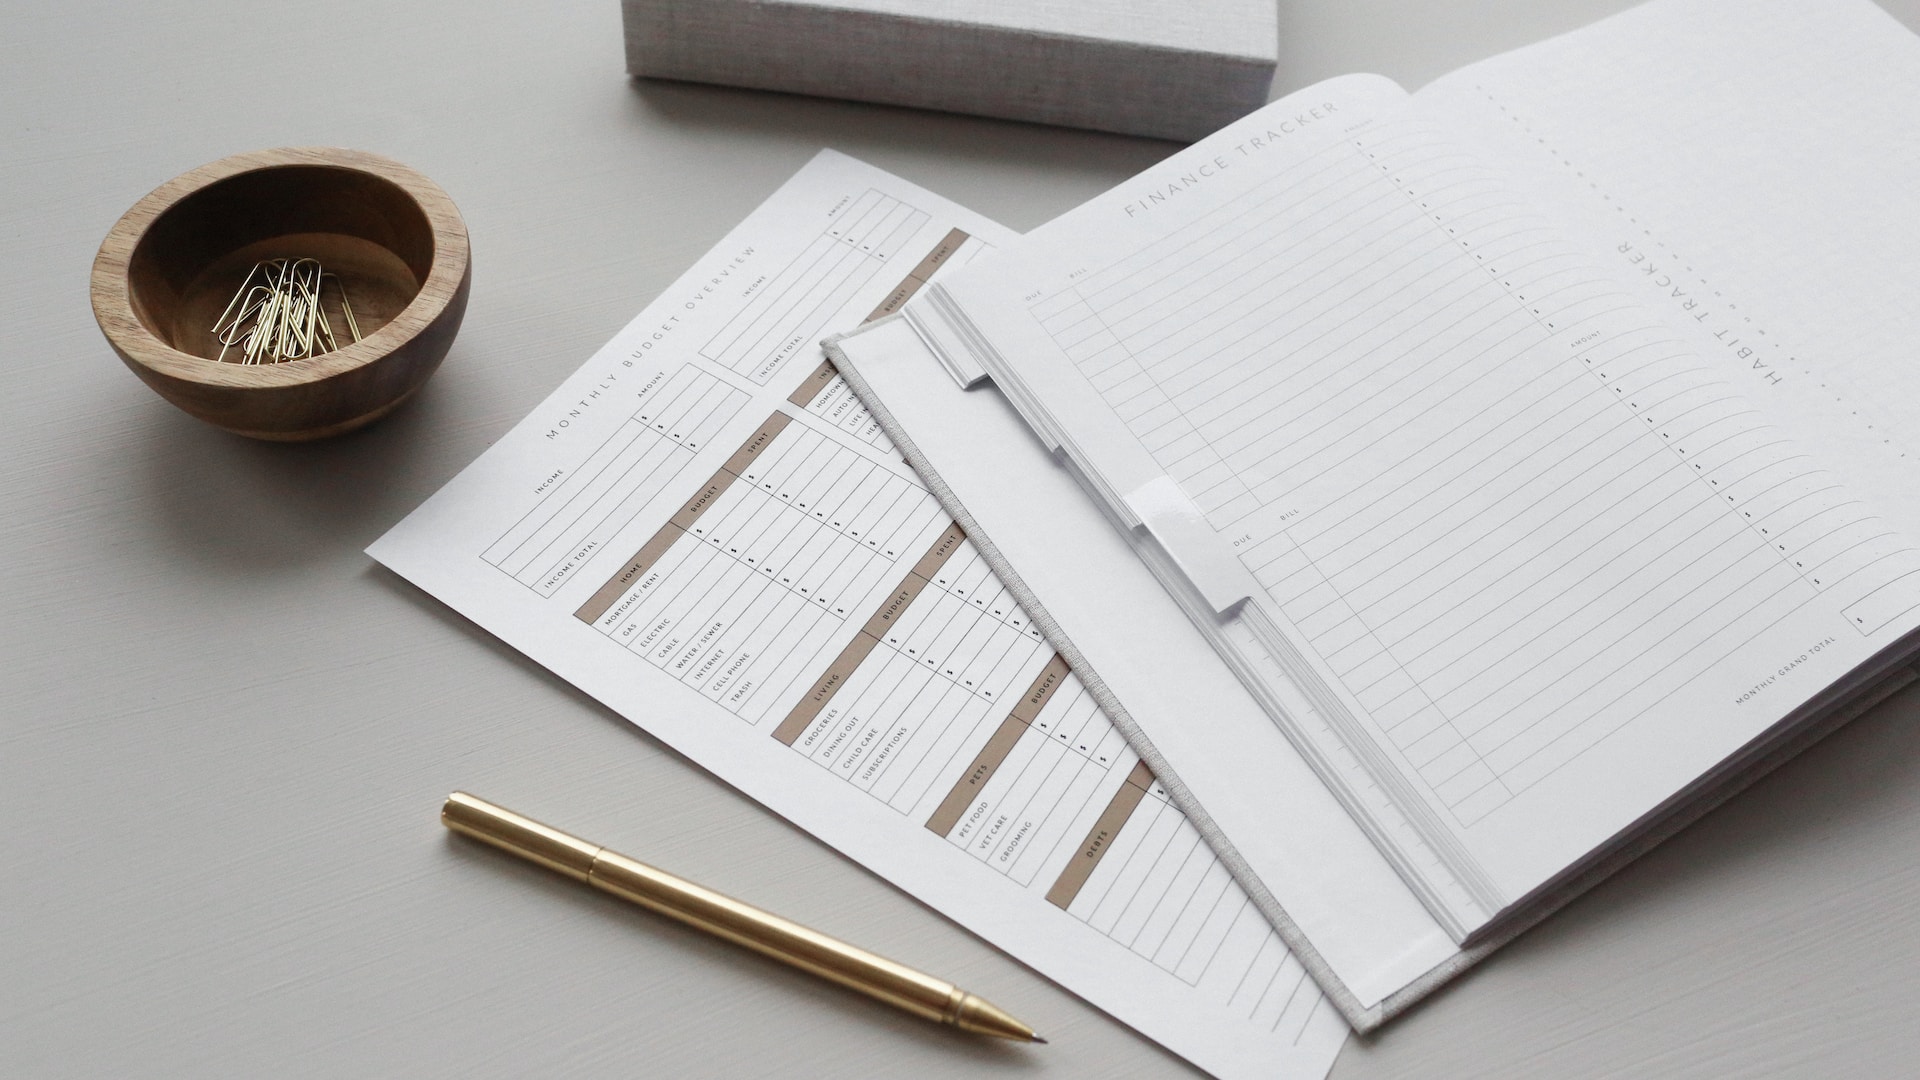 A blank notebook on a table with a heading that reads "Finance Tracker" next to a loose sheet of paper and a pencil.